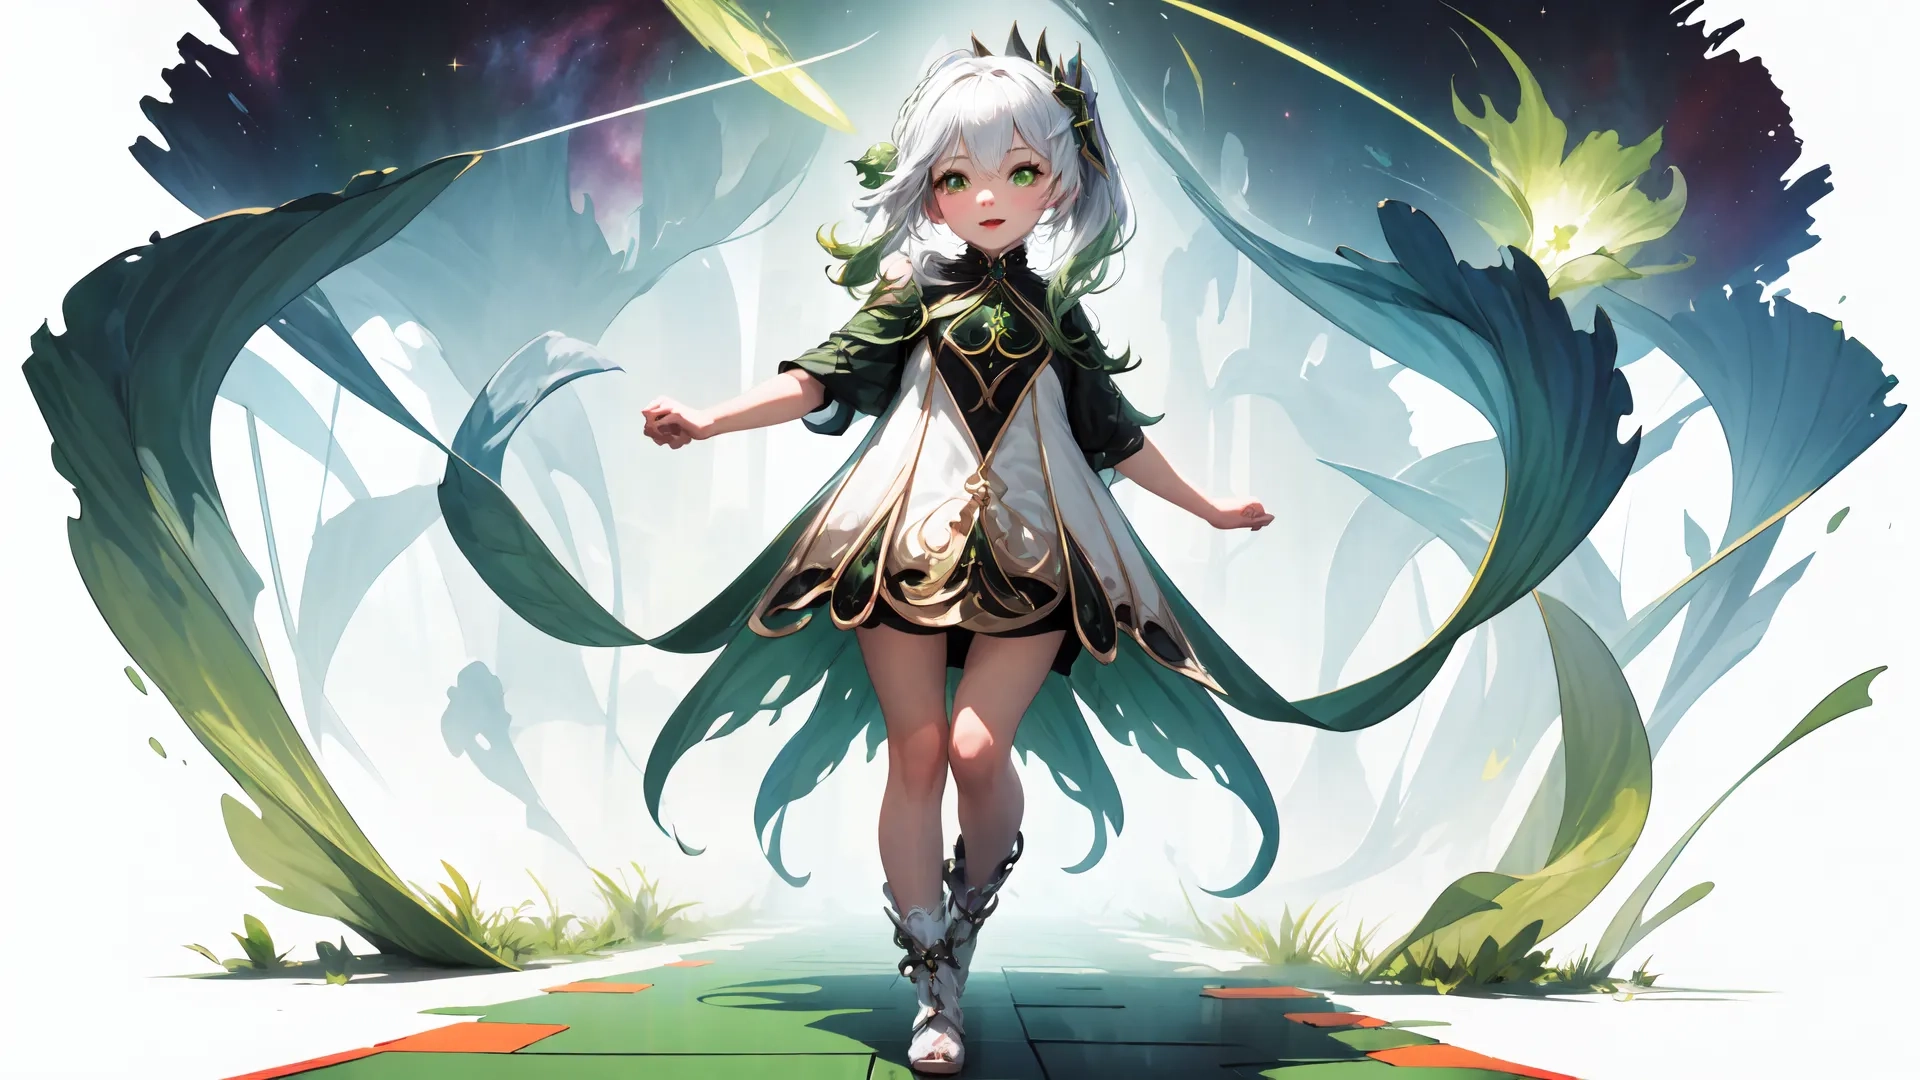 girl in a futuristic outfit holding her arm raised as she walks in front of foliage and alien sky background like scene background with grass and glowing light
